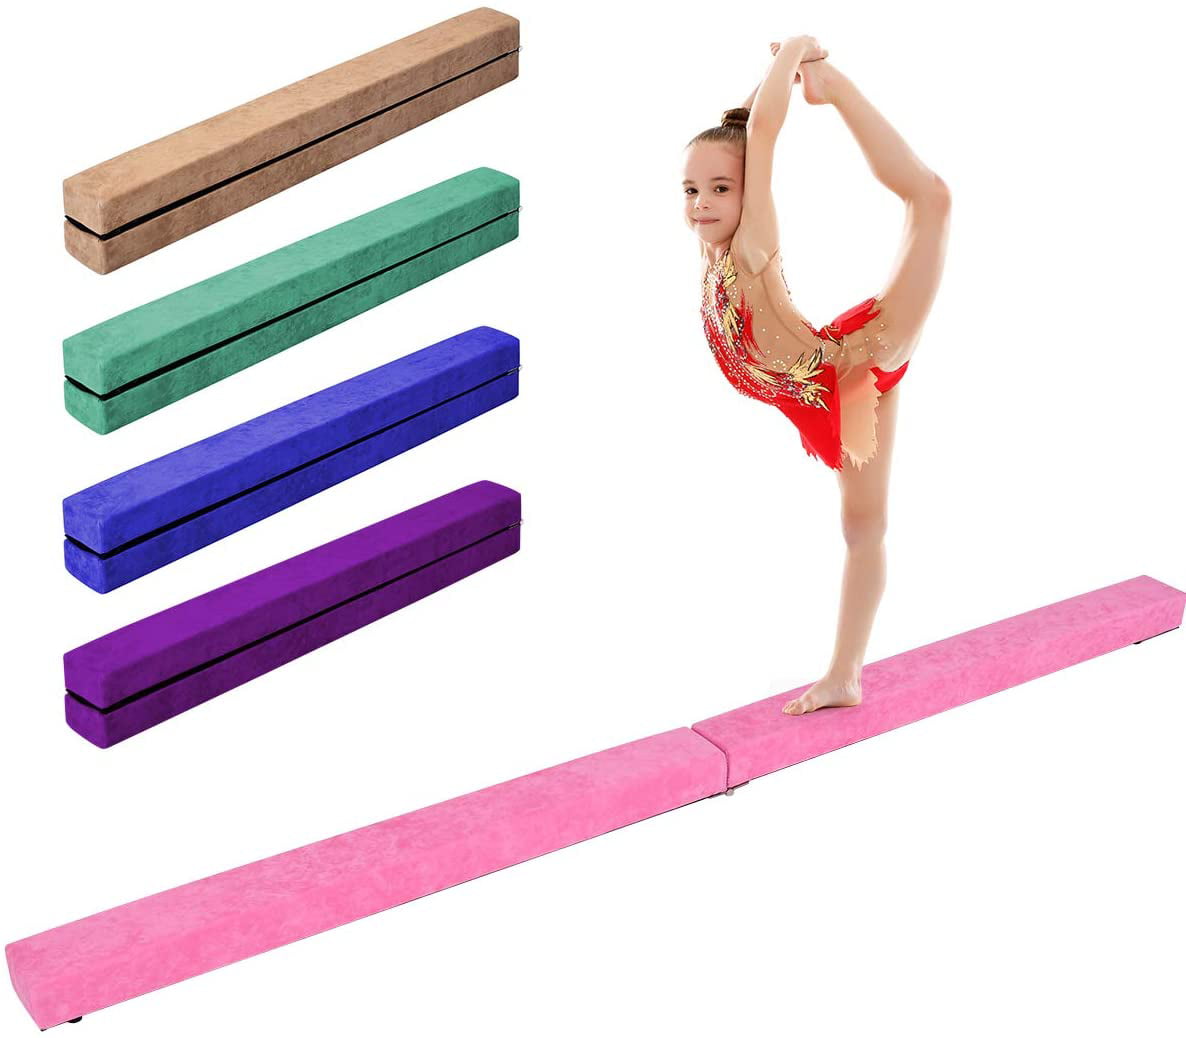 Juperbsky 8ft Balance Beam for Kids Gymnastics Practice Floor Gym Equipment for Teens Hone Skills at Home Non Slip Folding and Easy to Store 